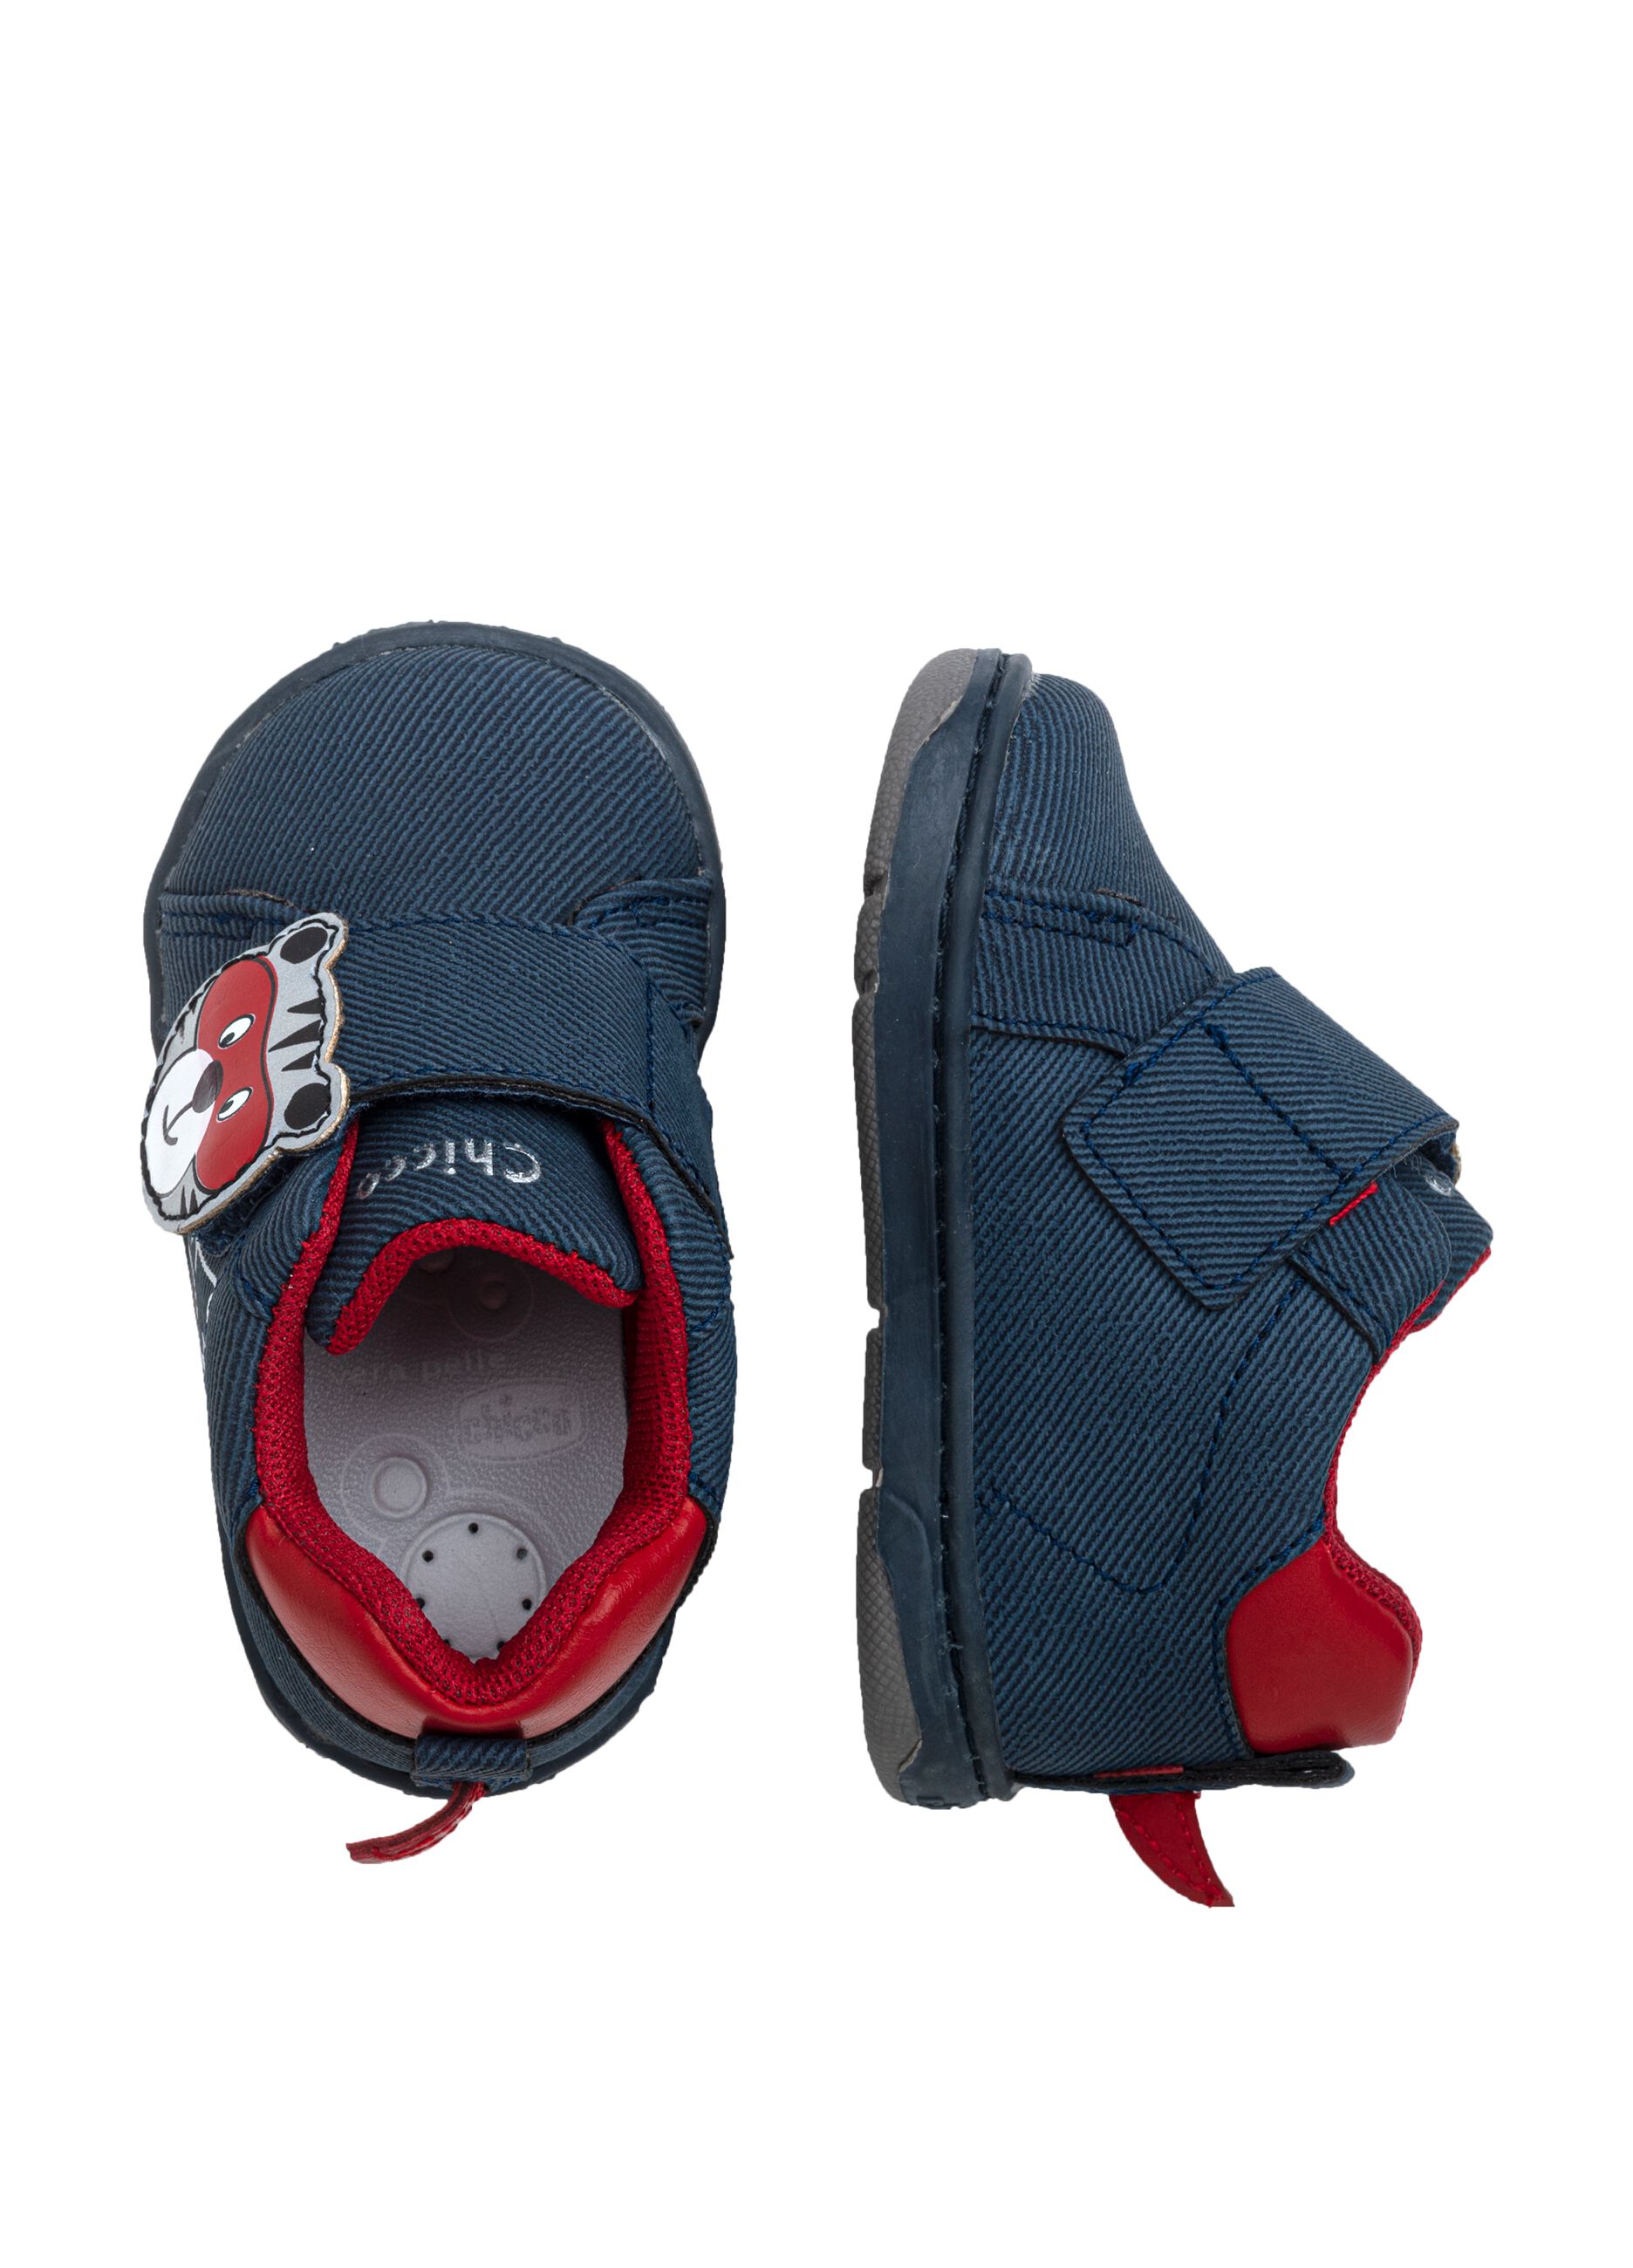 Chicco shoes with raccoon patch